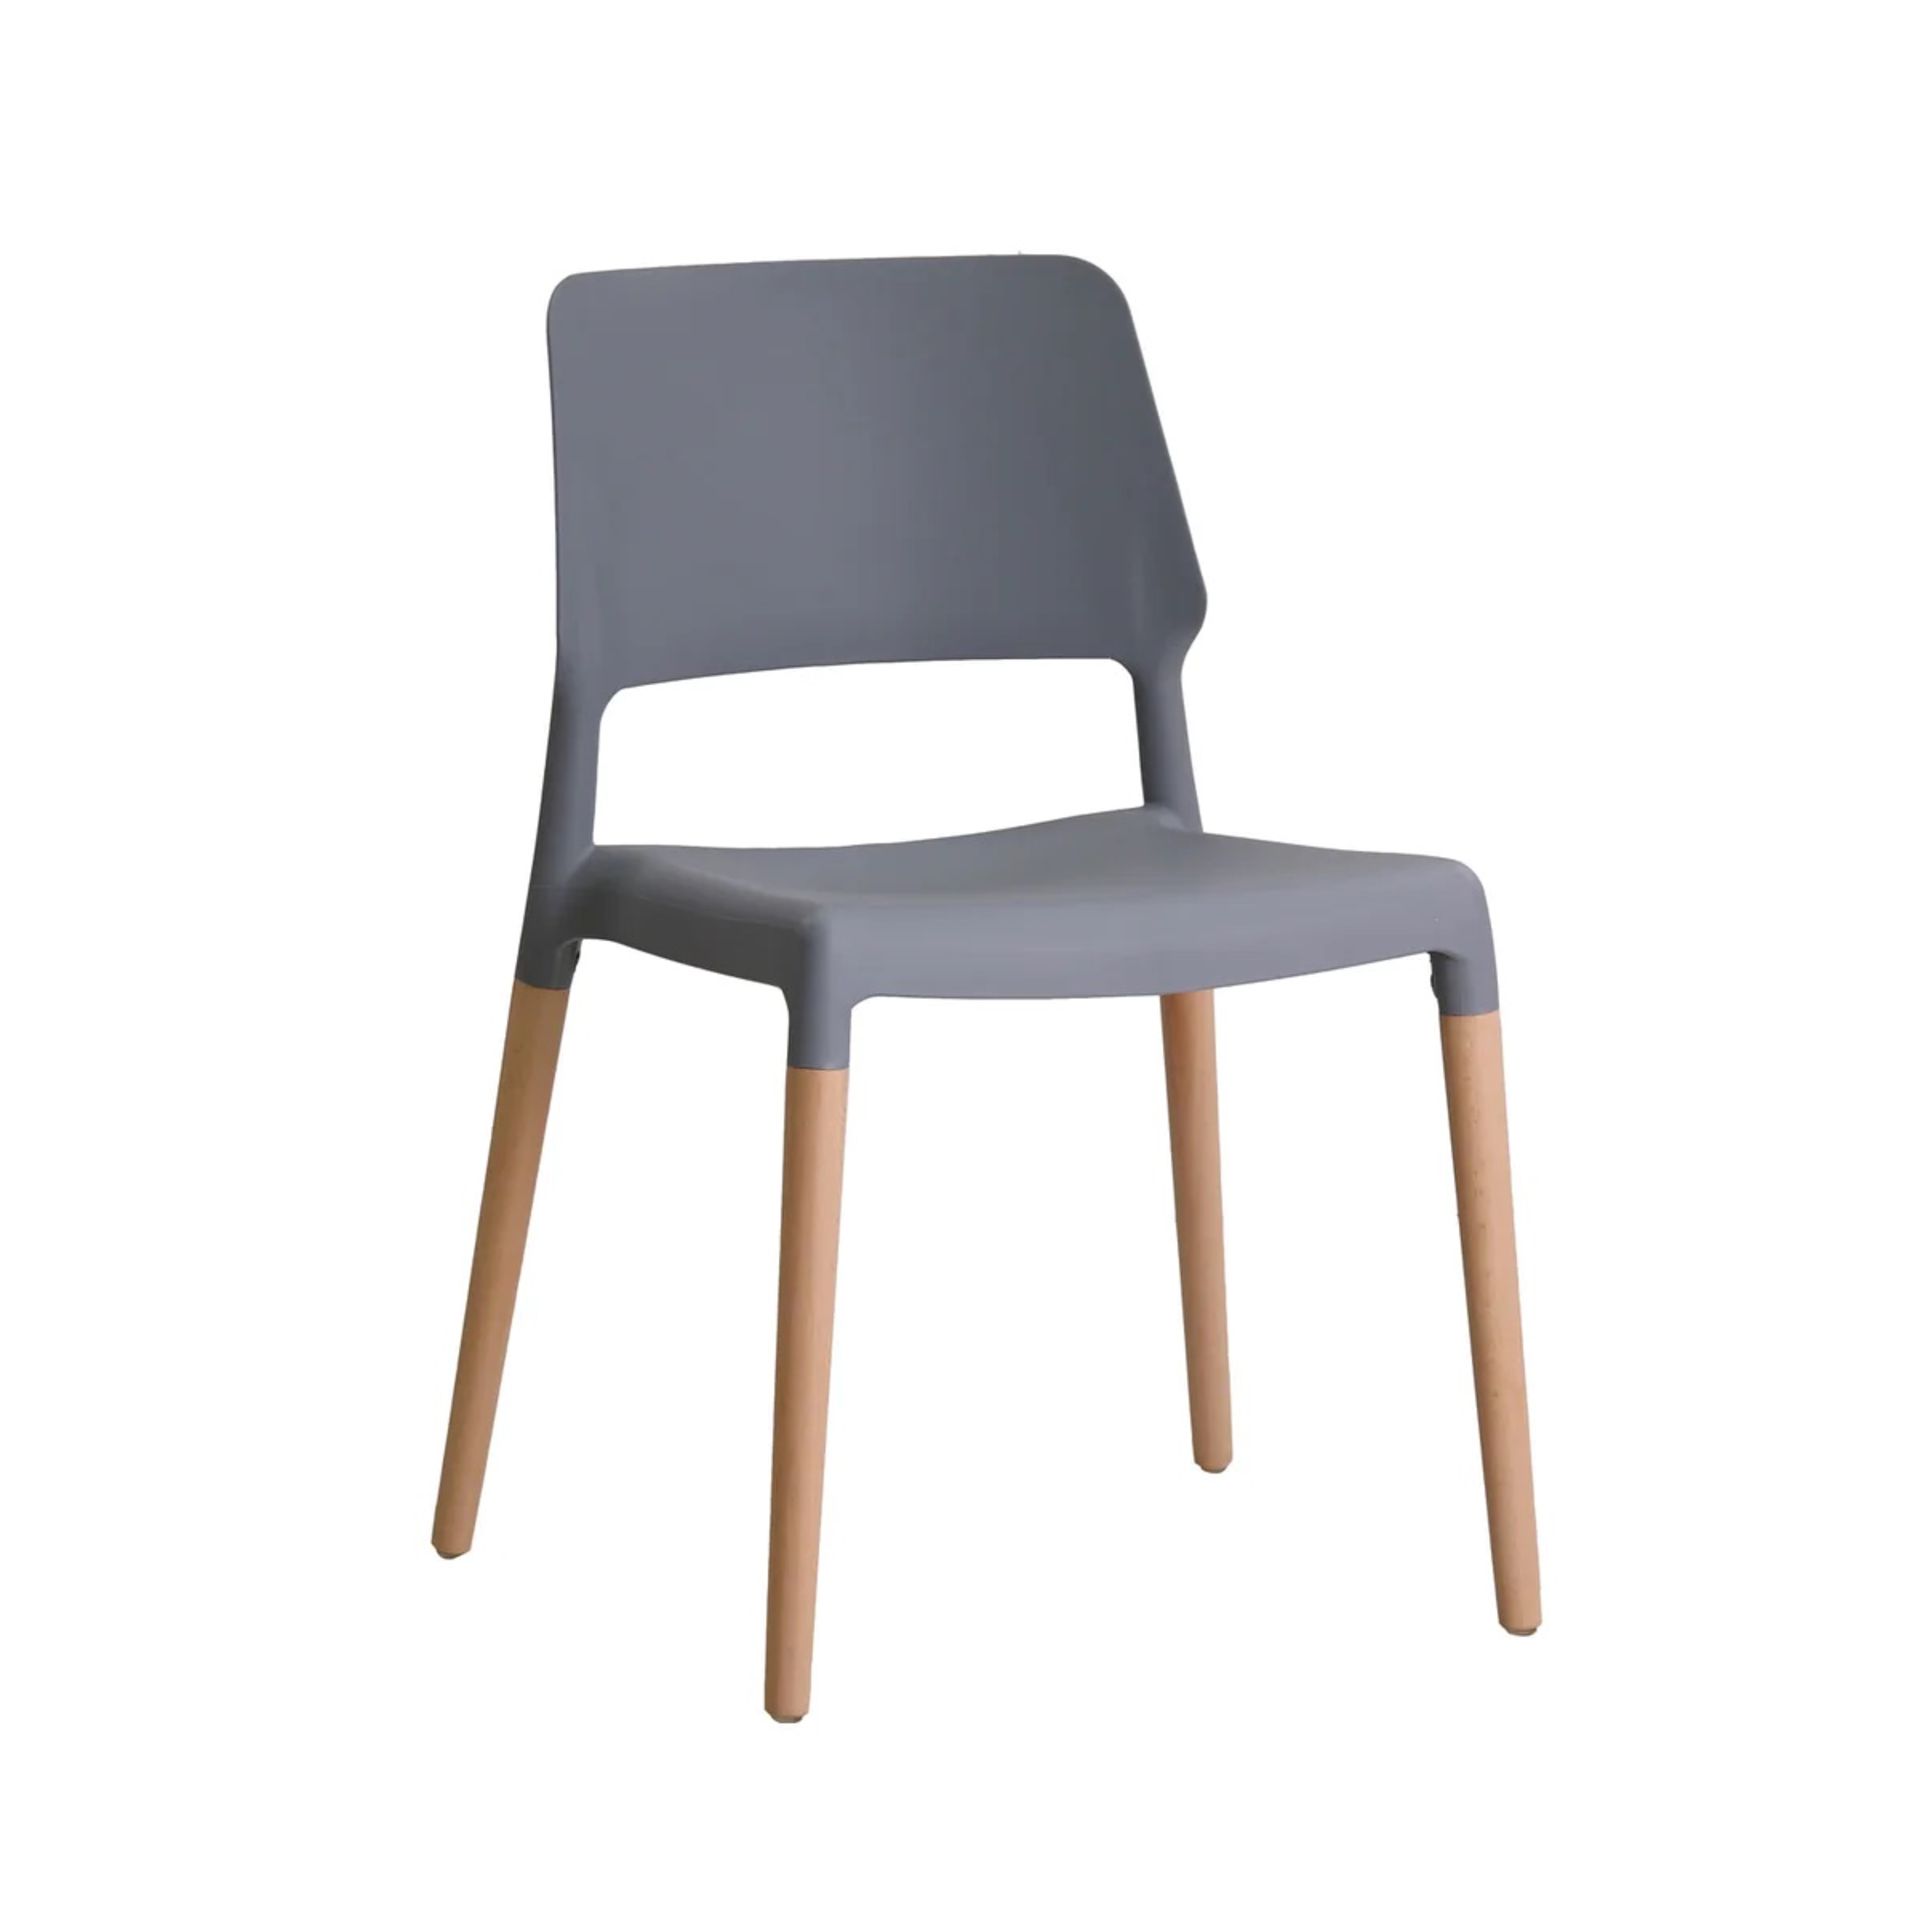 A1 PRODUCT NEW -   RIVA PAIR OF DINING CHAIRS IN GREY DURABLE PLASTIC - RRP Â£159 PER PAIR - Image 2 of 3